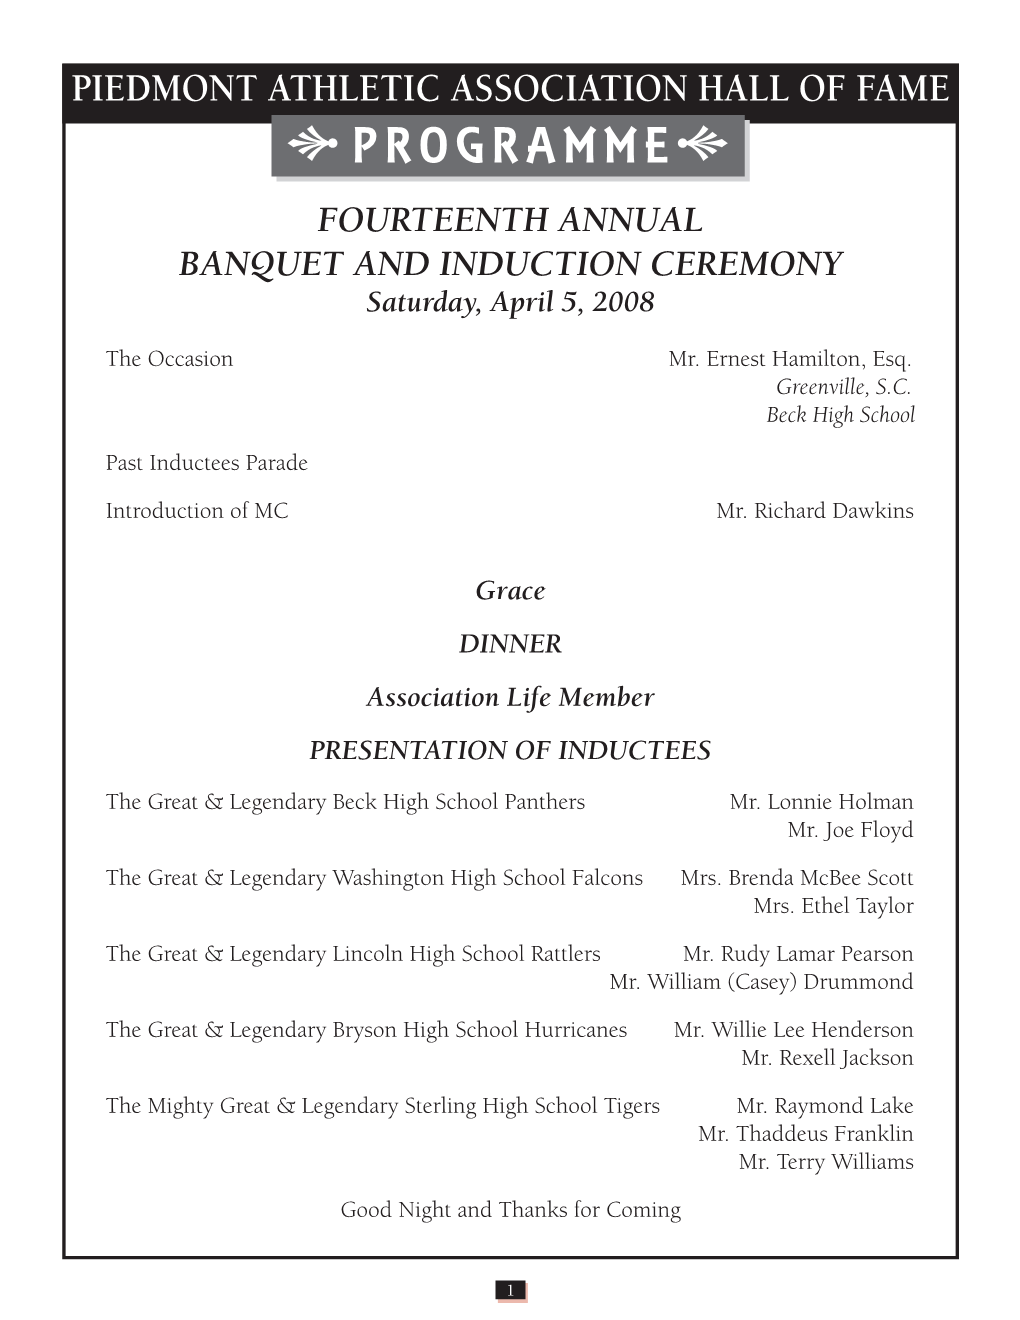 PROGRAMME FOURTEENTH Annual Banquet and Induction Ceremony Saturday, April 5, 2008